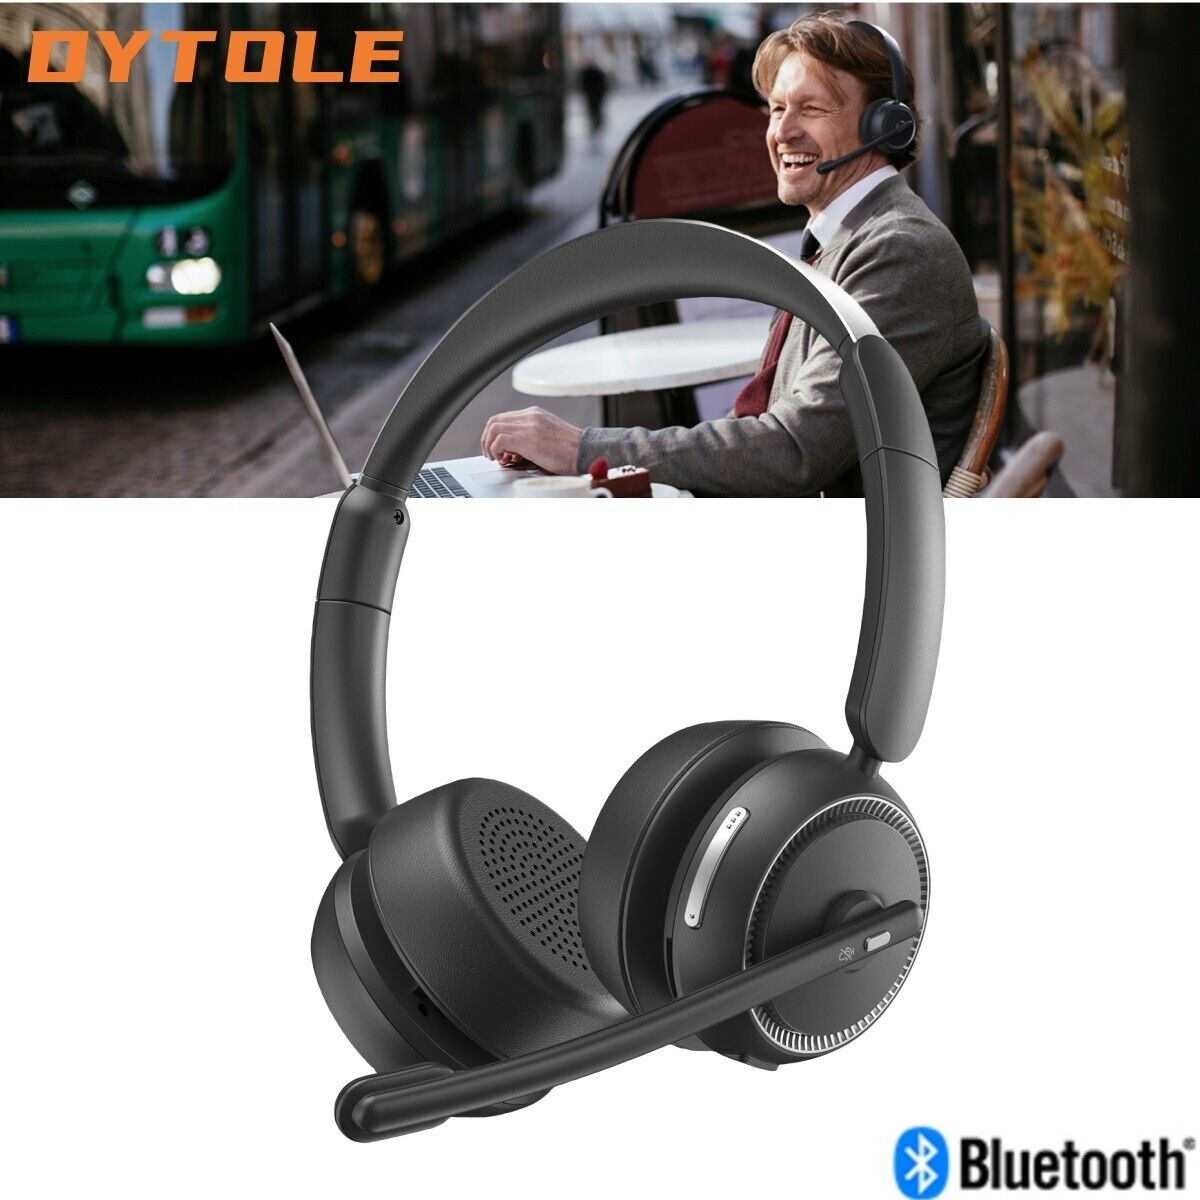 Dytole Wireless Headset Bluetooth Headset With Noise Canceling Mic & HI-FI Sound